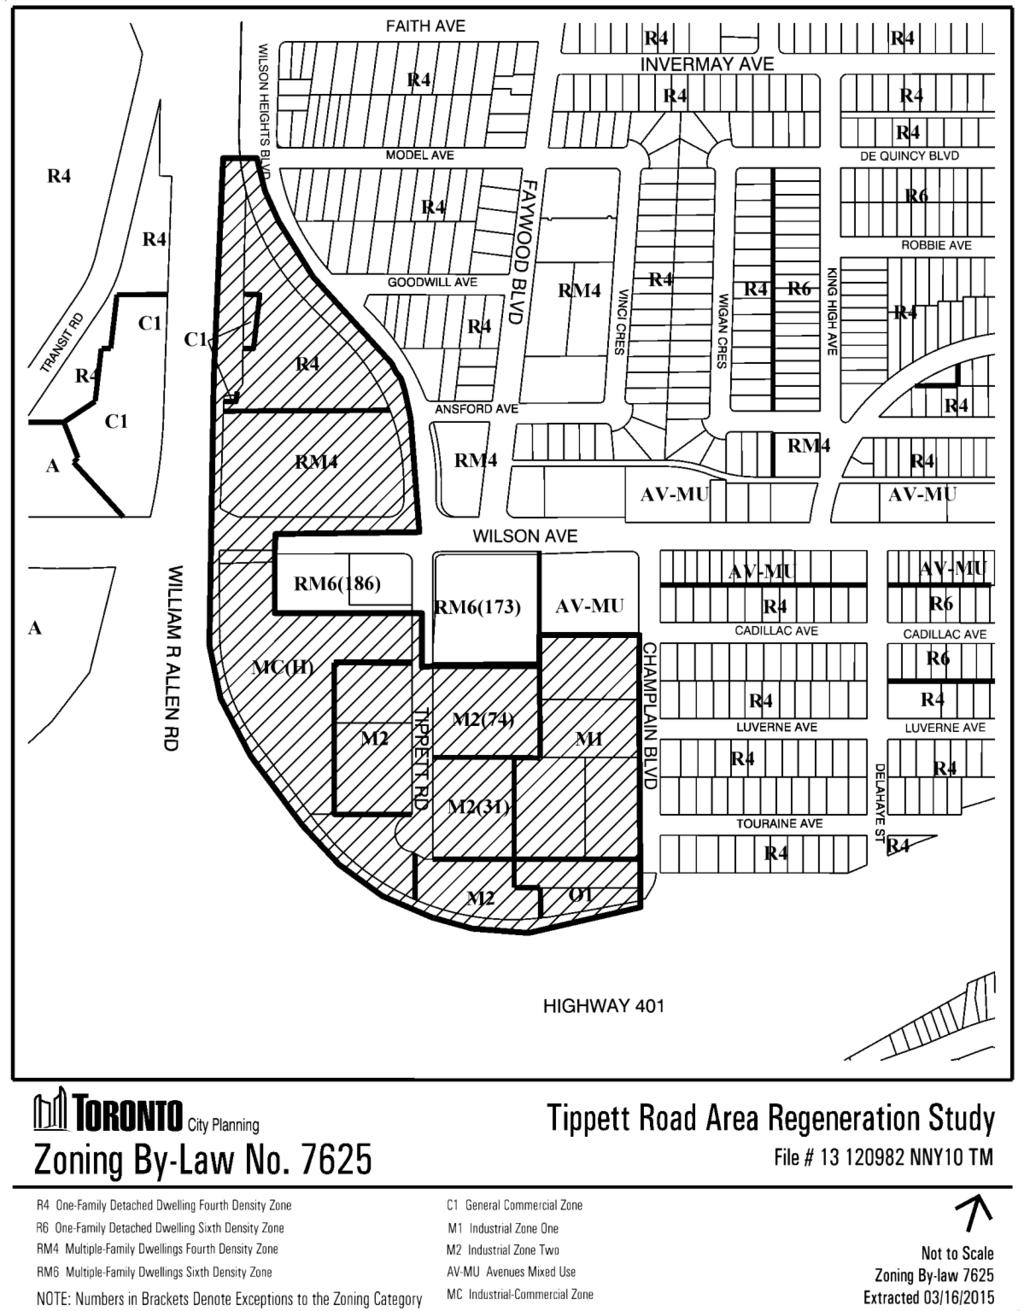 Attachment 6a: Former City of North York Zoning By-law No.